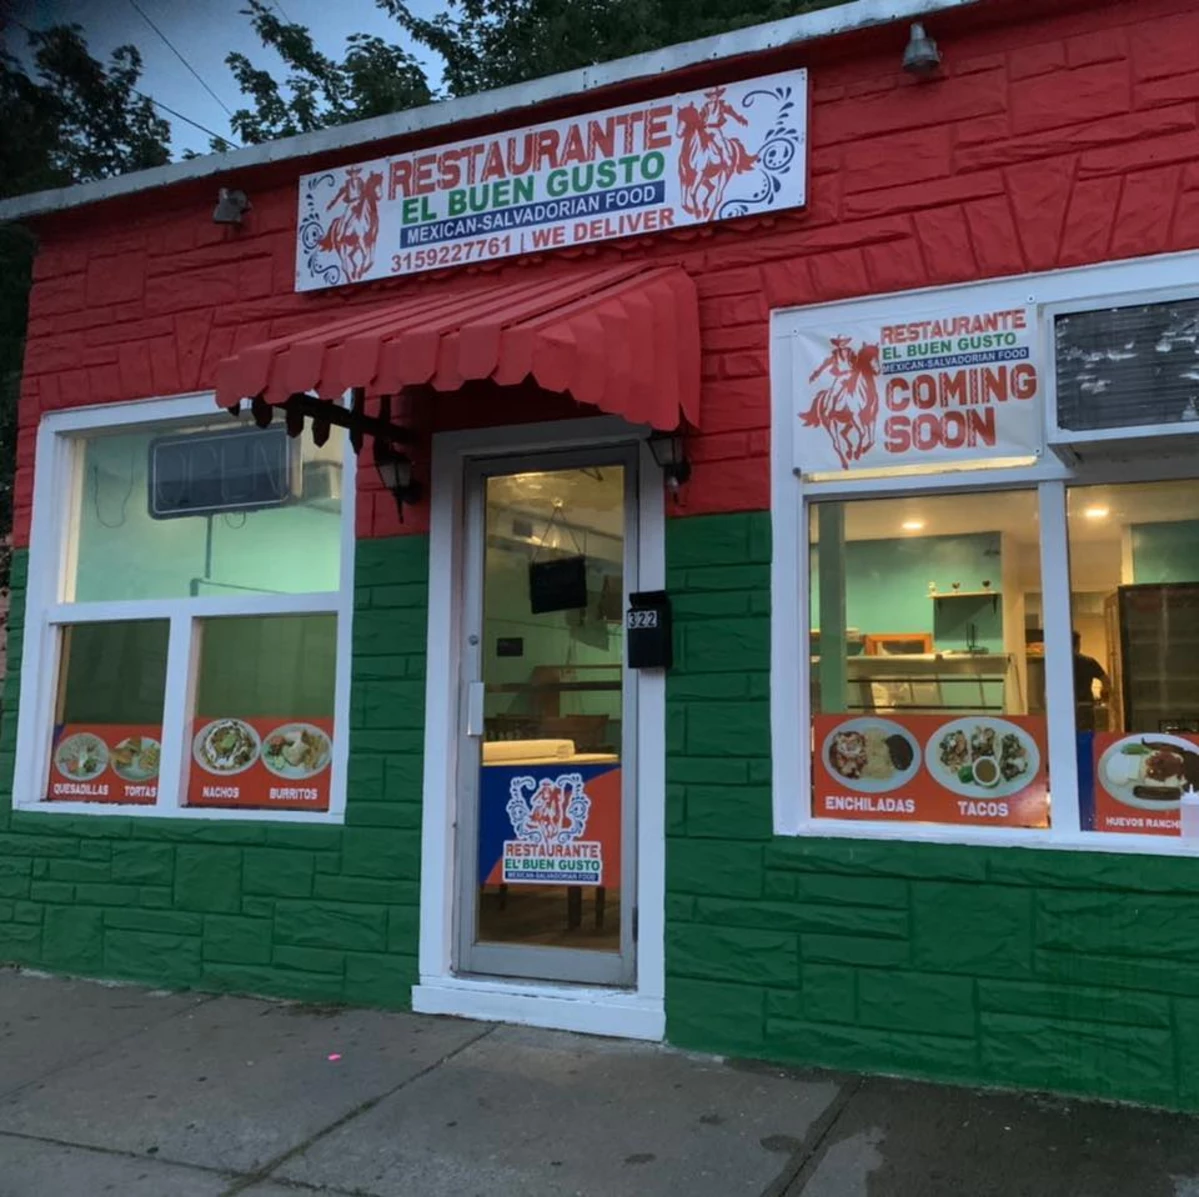 New Authentic Mexican Restaurant Now Open in Utica